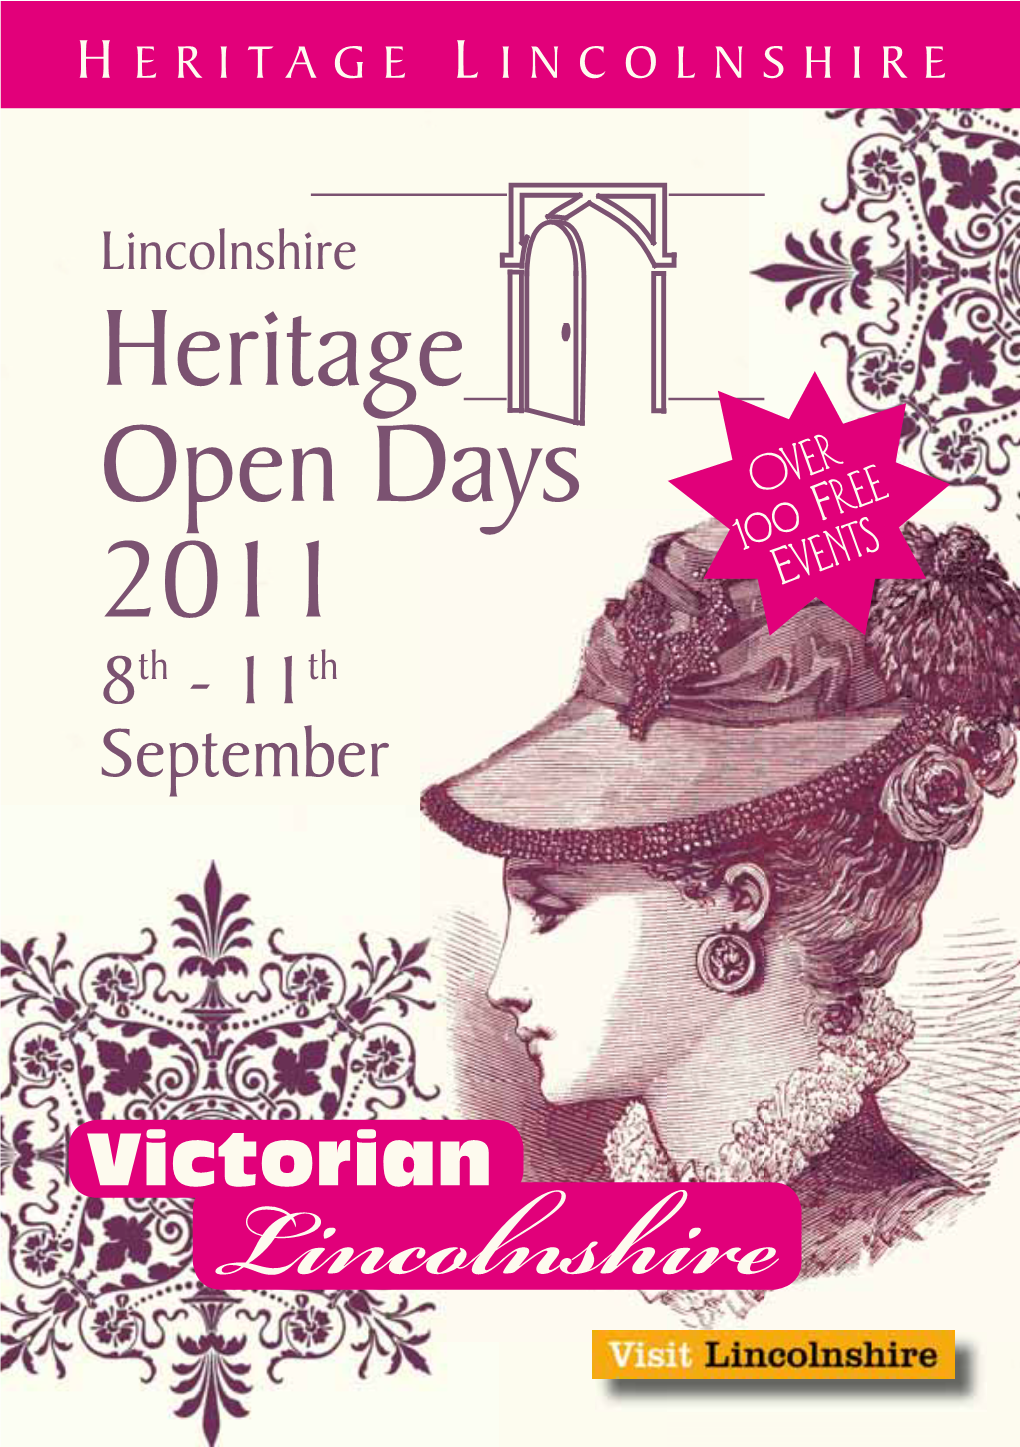 Lincolnshire Heritage Open Days Over 100 Free 2011 Events 8Th - 11Th September